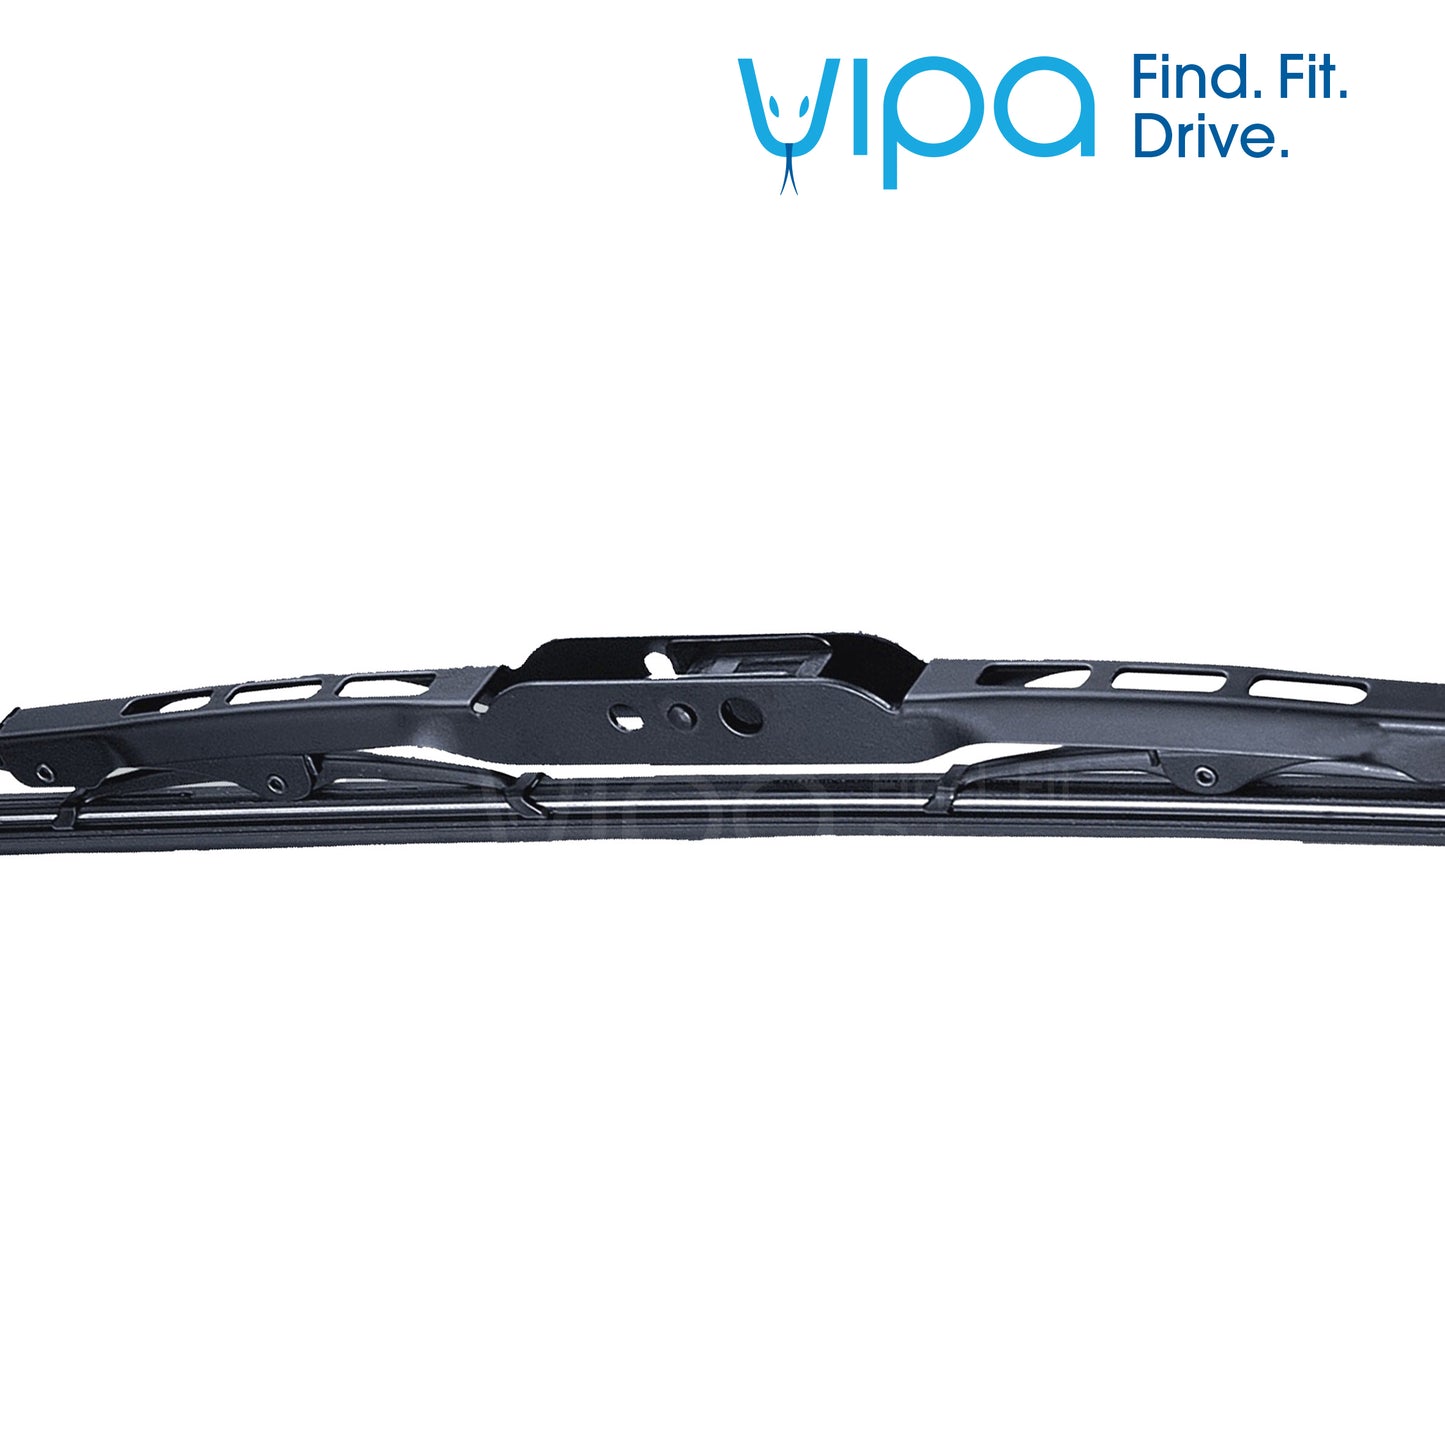 OPEL MOVANO Chassis Cab May 2010 to Nov 2021 Wiper Blade Kit